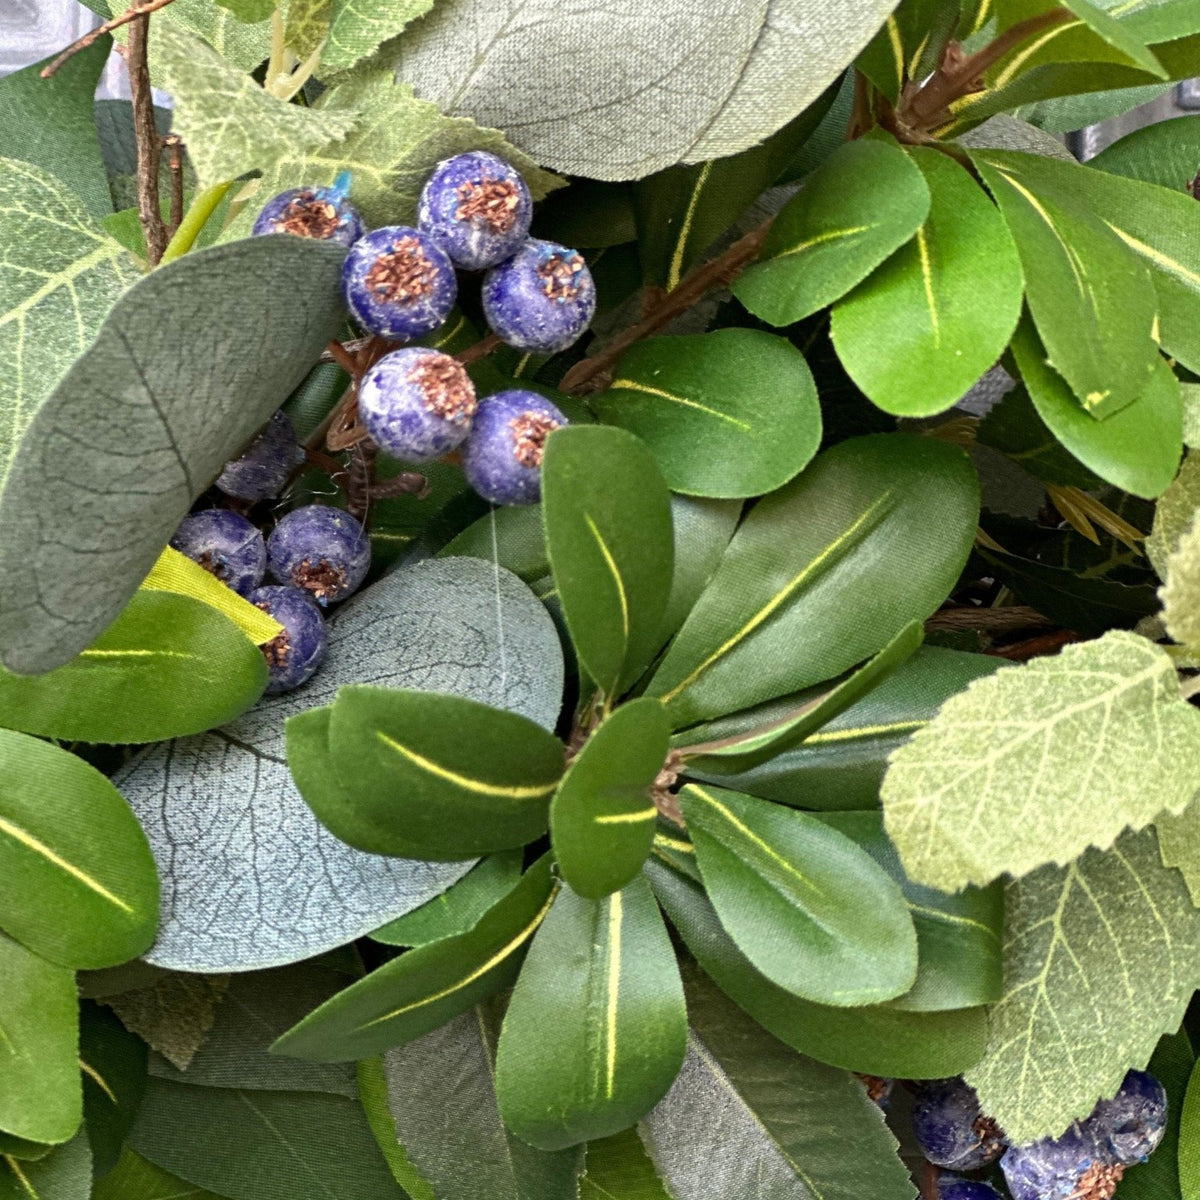 Evergreen and blueberry wreath